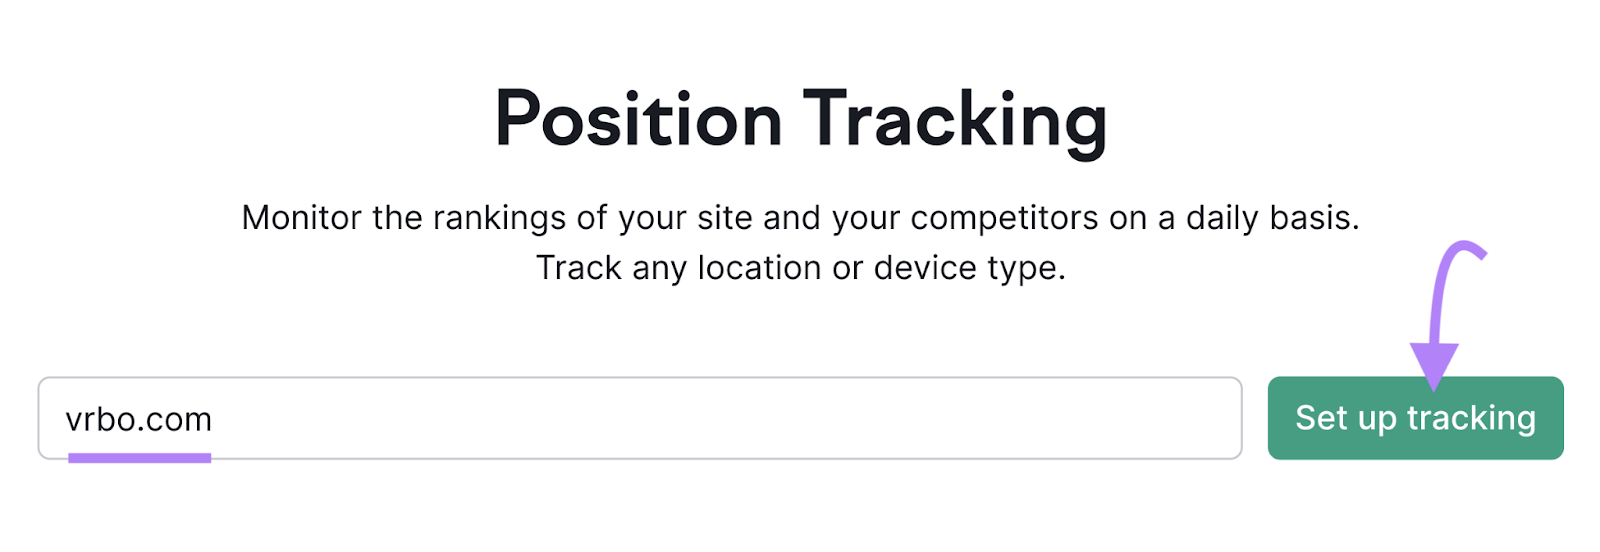 "vrbo.com" entered into the Position Tracking tool search bar